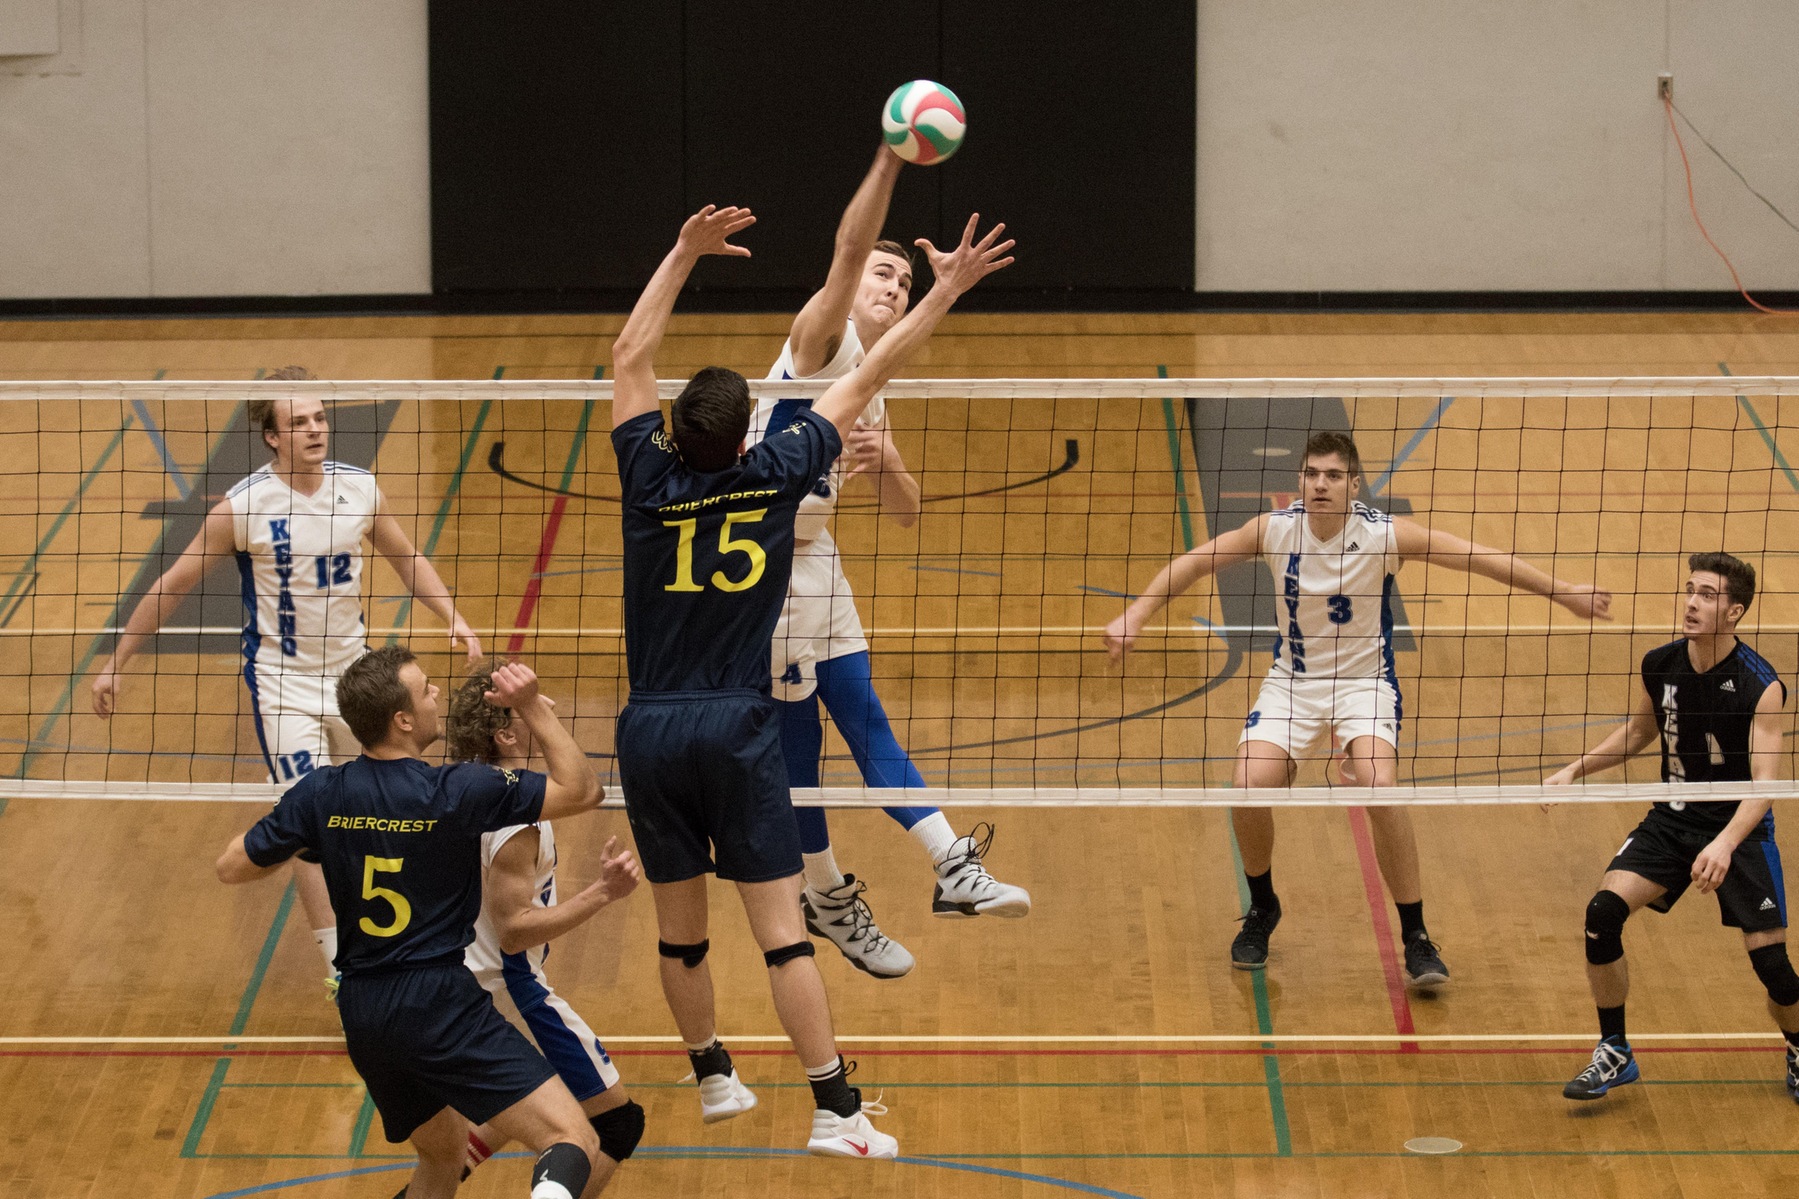 As a team, the Keyano College Huskies finished with 38 kills in their match victory against the Briercrest College Clippers.